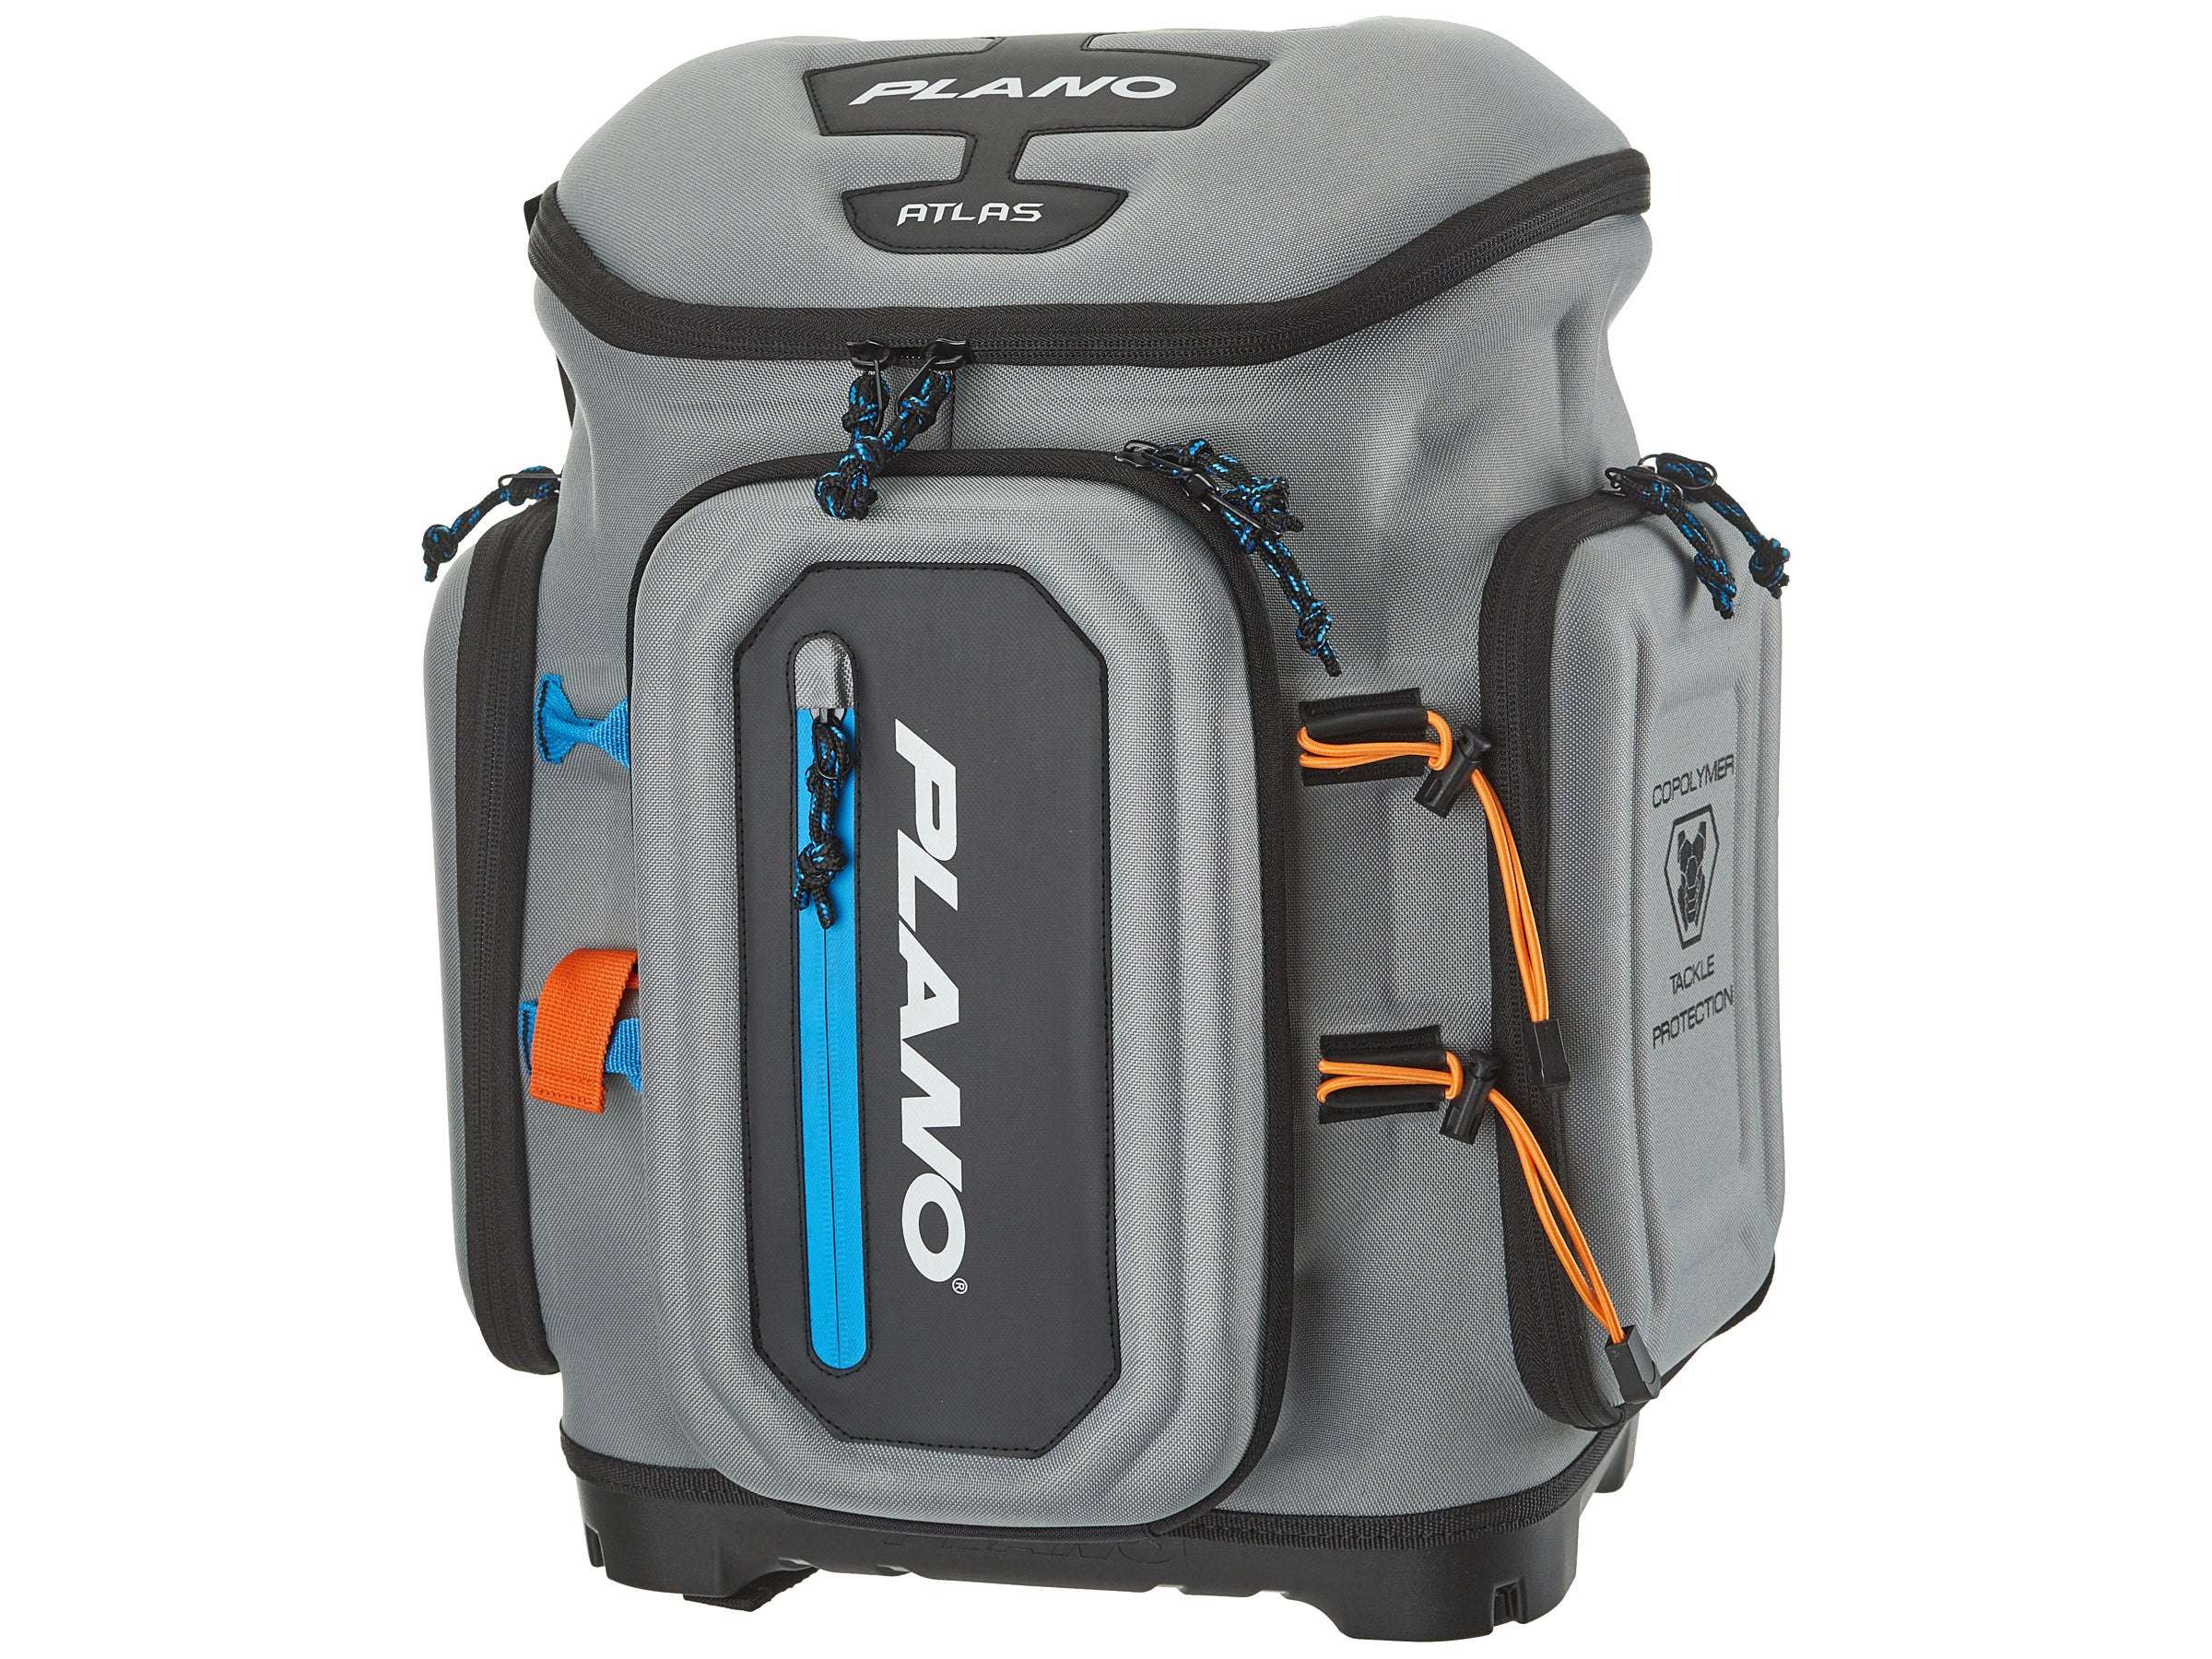 <p><strong>Plano Atlas Tackle Pack</strong><br> The Atlas Tackle Pack took home the award for Best Tackle Management at the 2021 iCast Show, and itâs not hard to see why with the number of unique features it possesses. A rigid, durable outer shell allows the Atlas Tackle Pack to hold its shape while keeping water away from your precious gear. The Atlas Tackle Pack also comes pre packed with three Plano 3750 StowAway Utility Boxes. <a href=